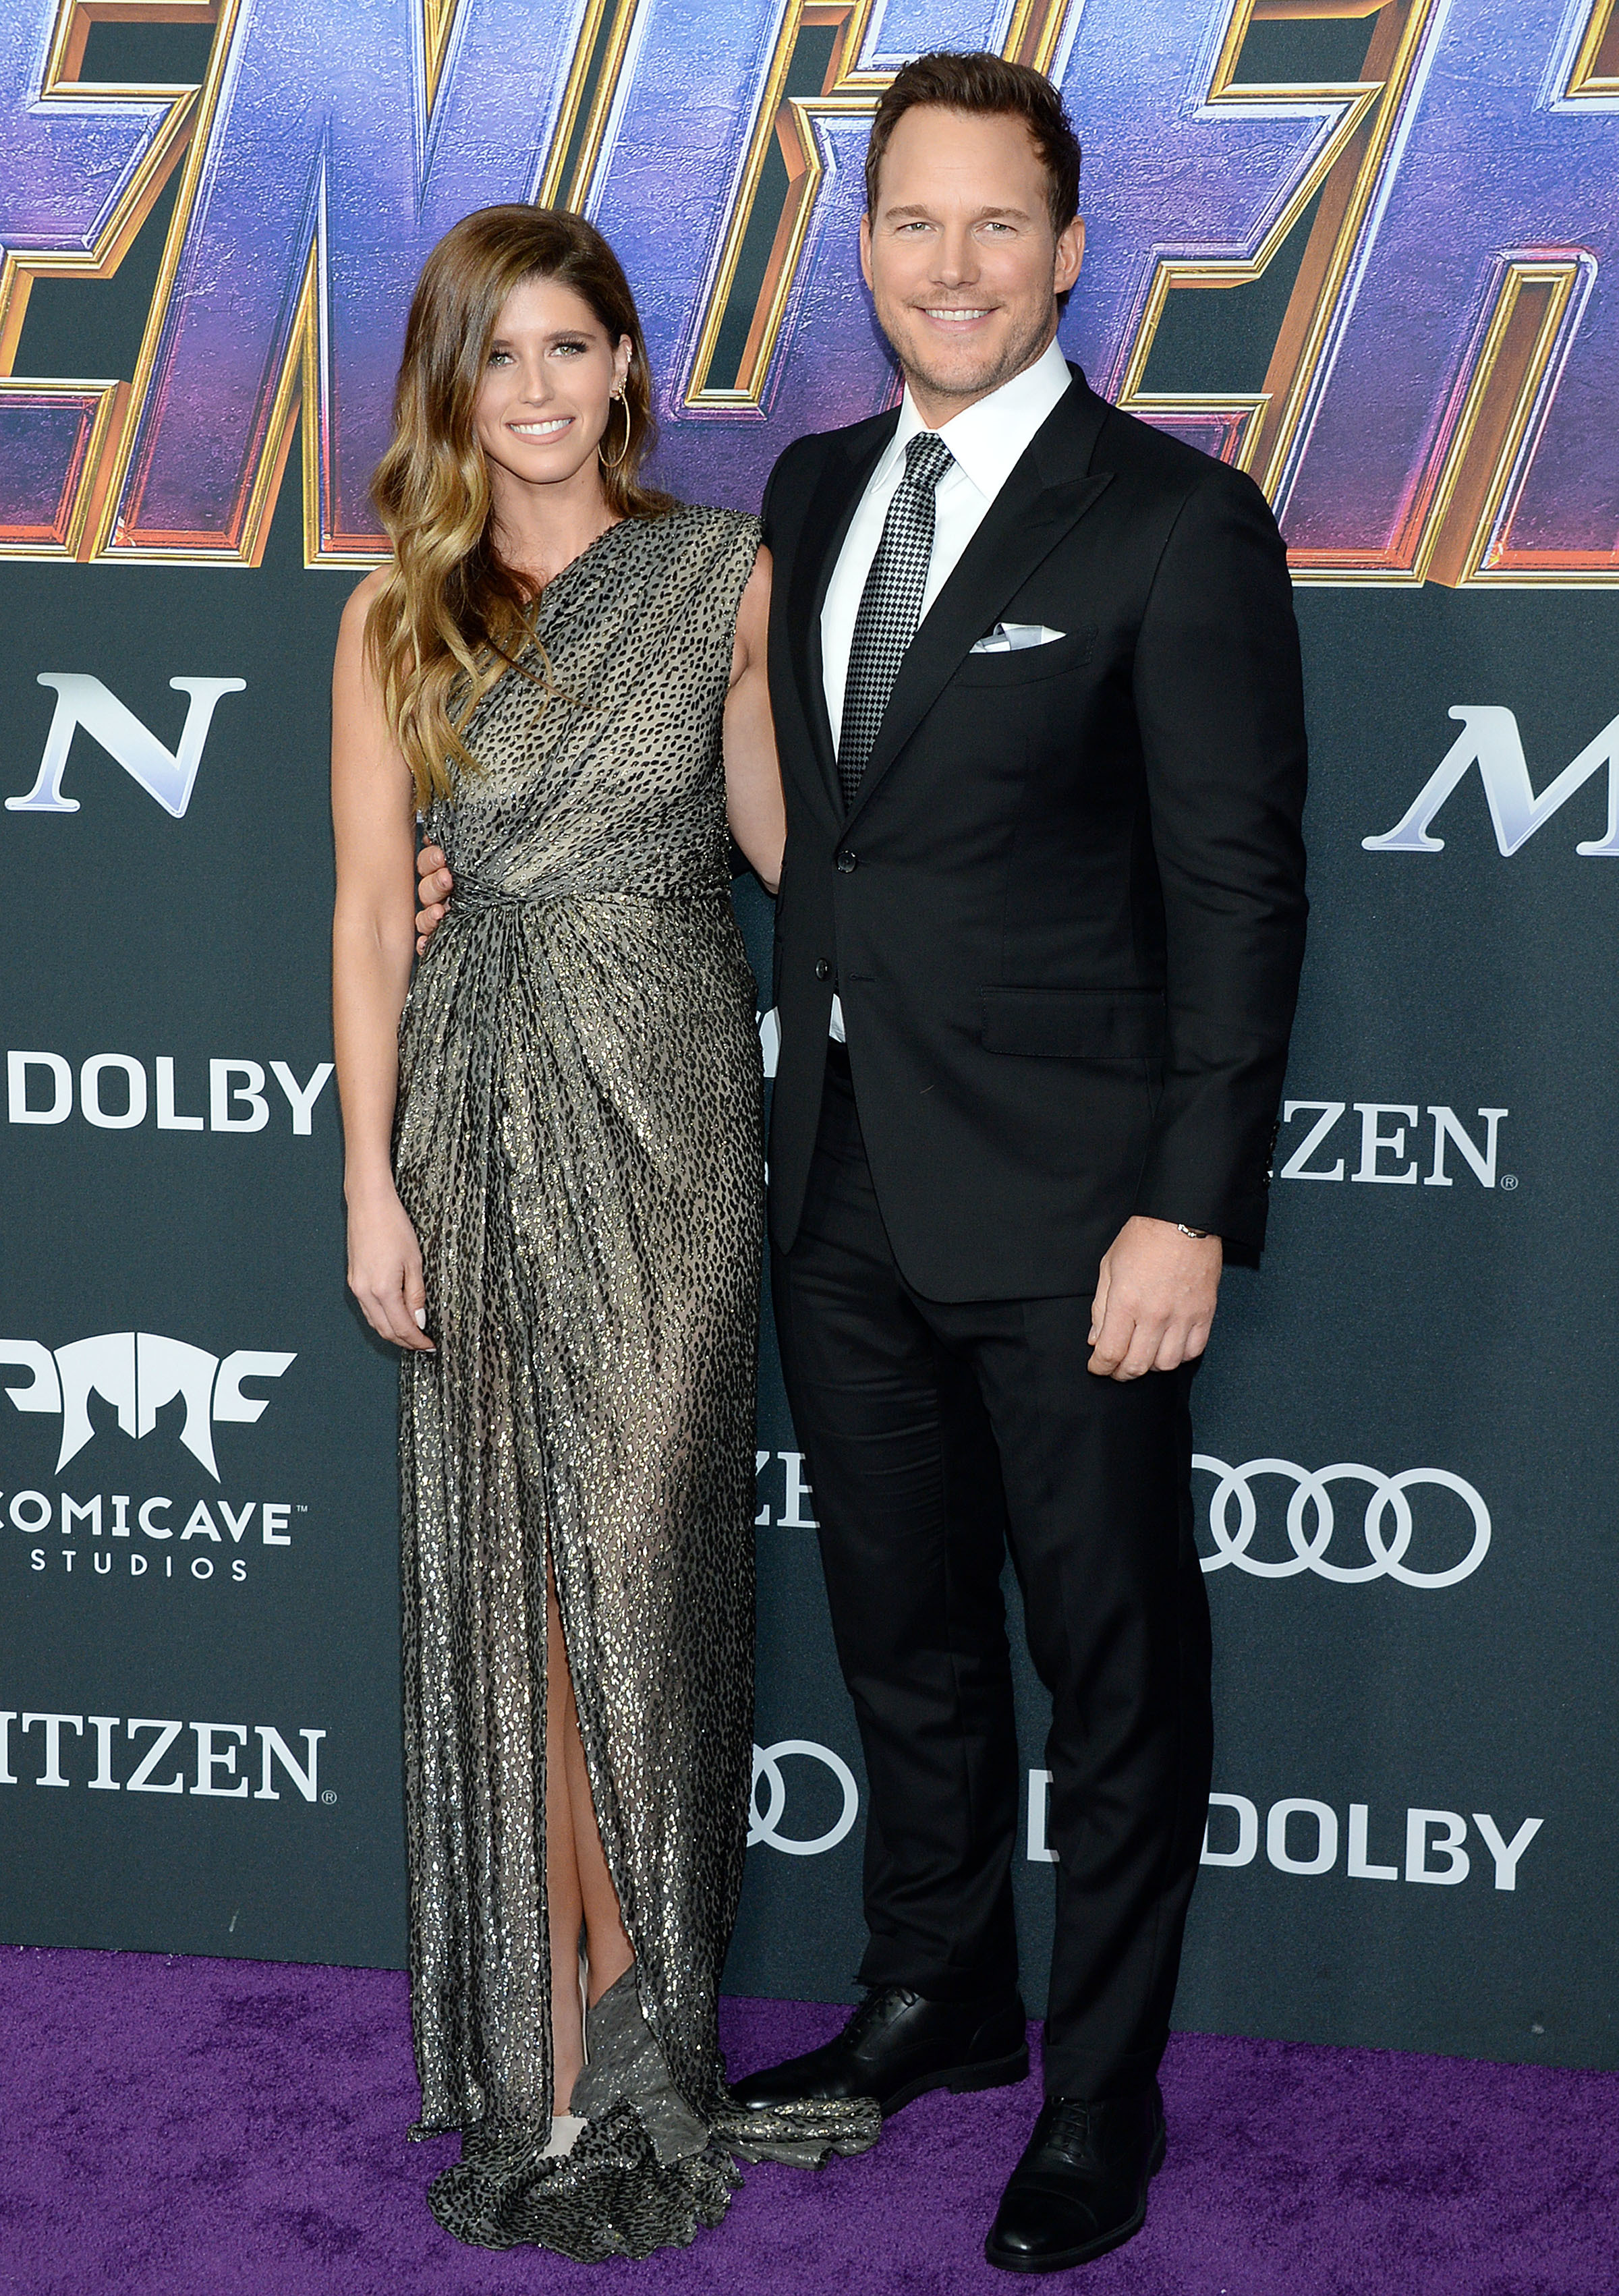 <p>Speculation that <a href="https://www.wonderwall.com/celebrity/profiles/overview/chris-pratt-1564.article">Chris Pratt</a> was dating Katherine Schwarzenegger kicked off in June 2018 when they were spotted having a picnic together on Father's Day. Almost a year later, <a href="https://www.wonderwall.com/celebrity/couples/chris-pratt-marries-katherine-schwarzenegger-plus-more-celeb-love-life-news-early-june-2019-rihanna-talks-marriage-babies-romance-report-3019930.gallery">they got married</a> at the San Ysidro Ranch in Montecito, California. (They welcomed their first child in 2020.) So how did they meet? "We met at church!" the Christian actor told "Extra" in July 2019. "There's a lot of kismet, a lot of connections, but that is where we met."</p>